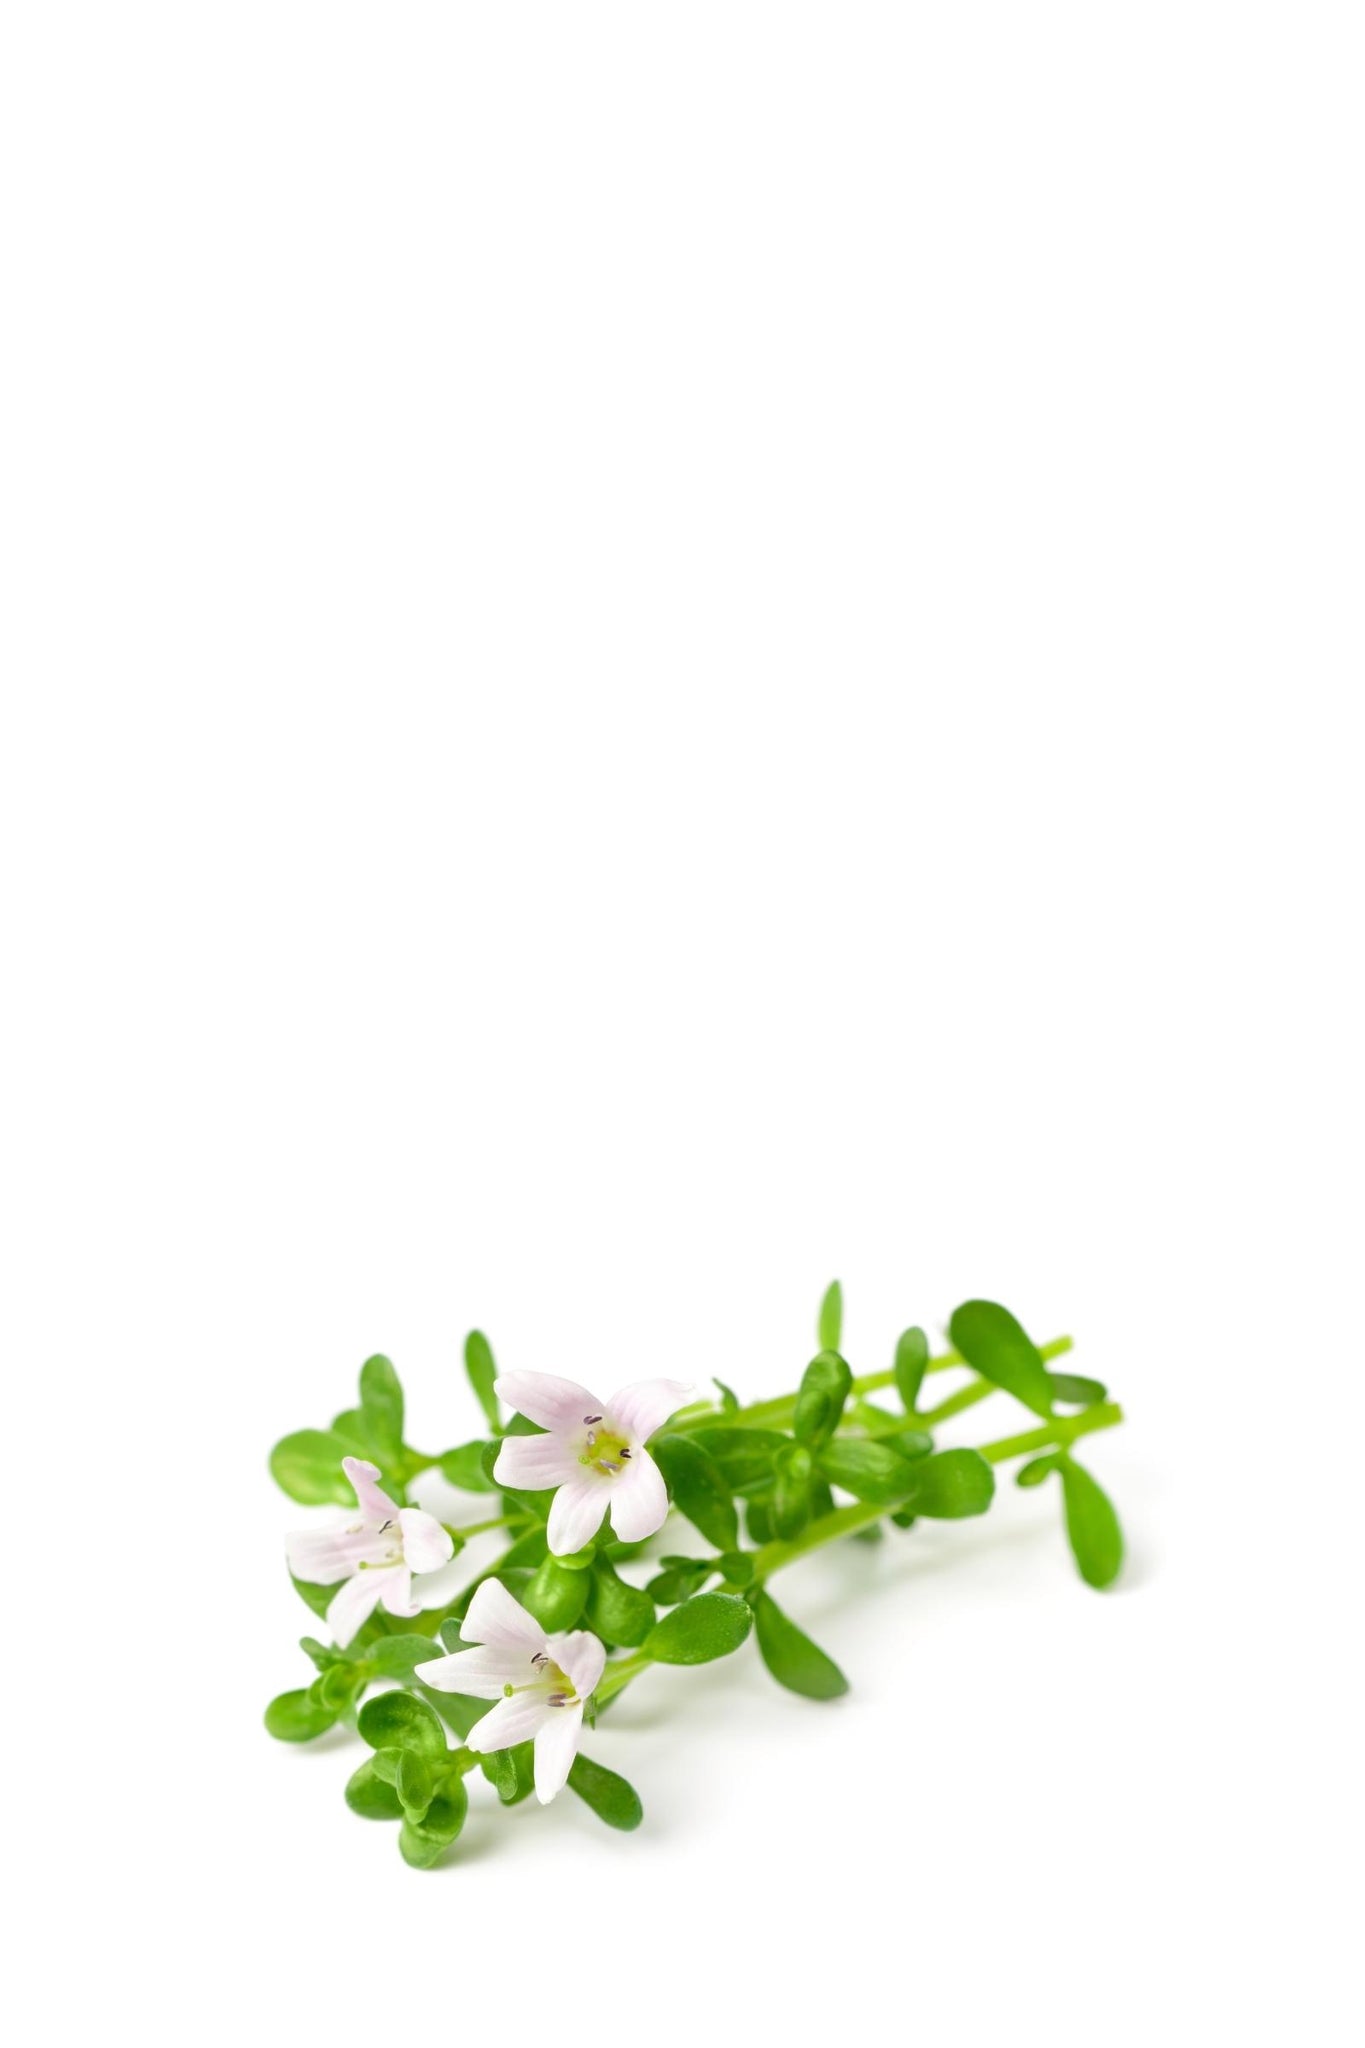 Bacopa Monnieri is a powerful nootropic herb used in traditional Ayurvedic medicine to enhance mental alertness, increase memory, and promote a sense of calm in times of stress or anxiety.